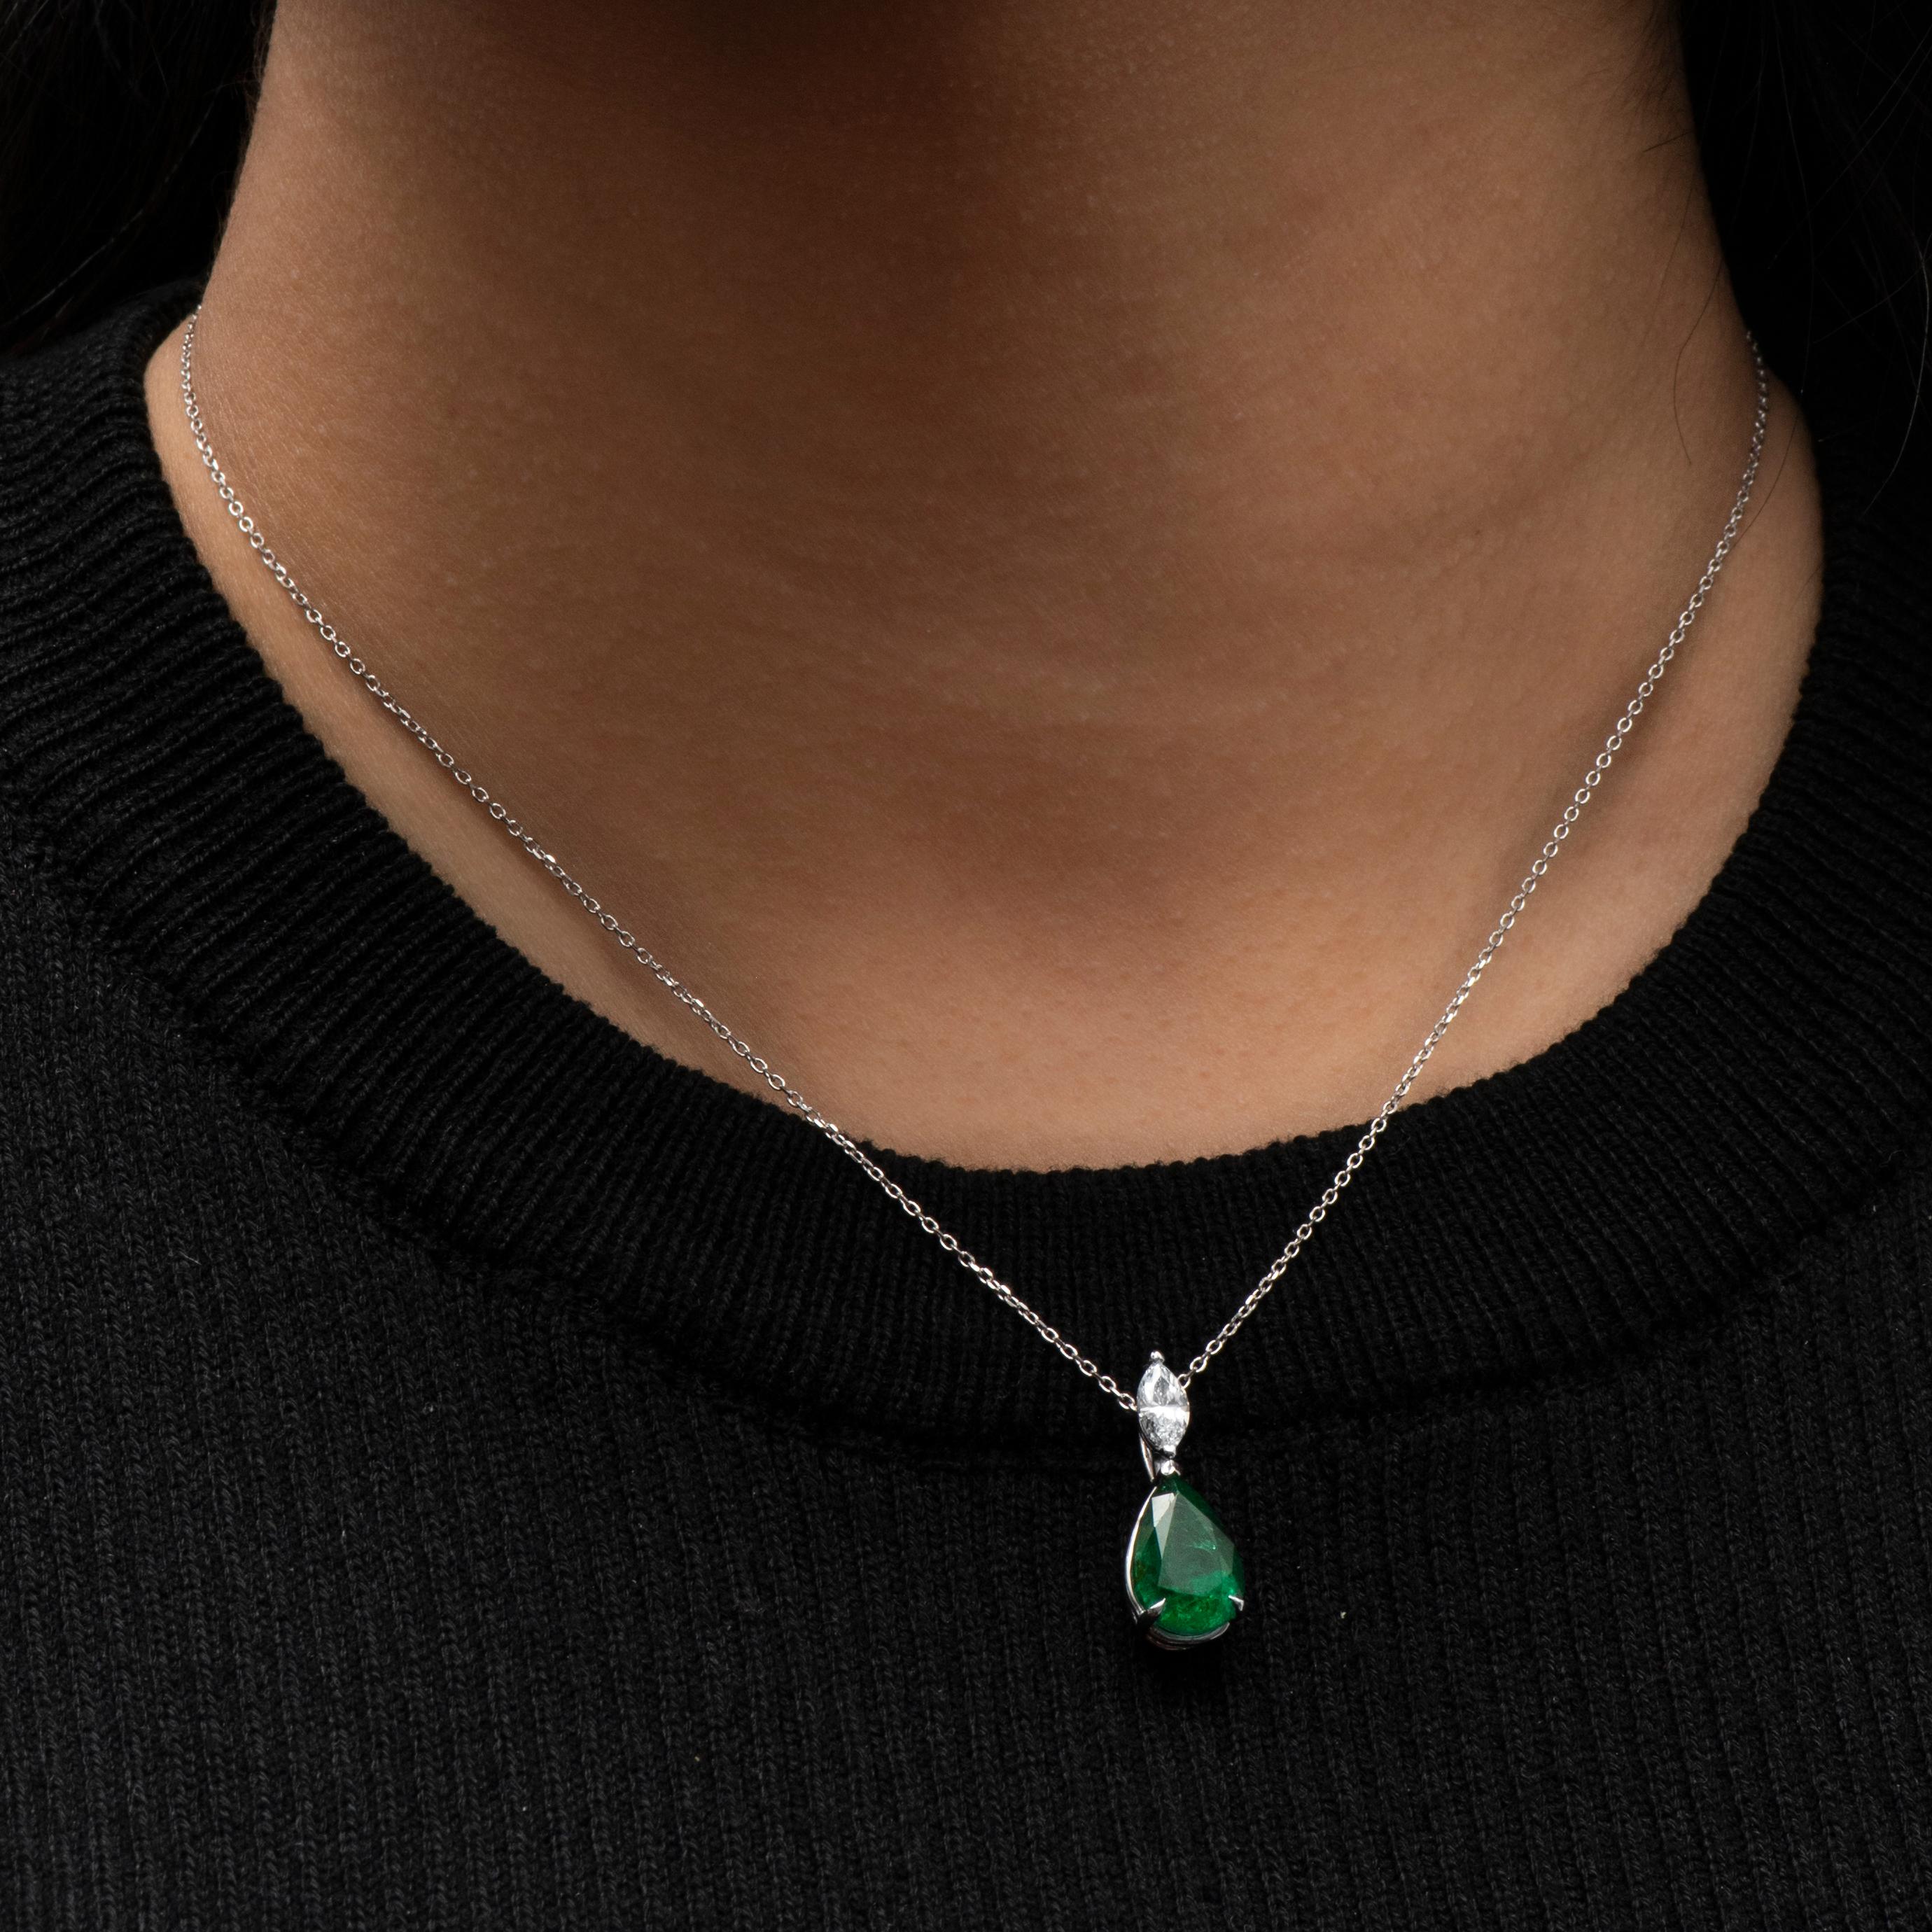 3.50ct Pear shape natural emerald with a 0.45ct Marquise shaped diamond set in an 18K white gold pendant. 

Diamond quality: D-E color, VS1-VS2 clarity 